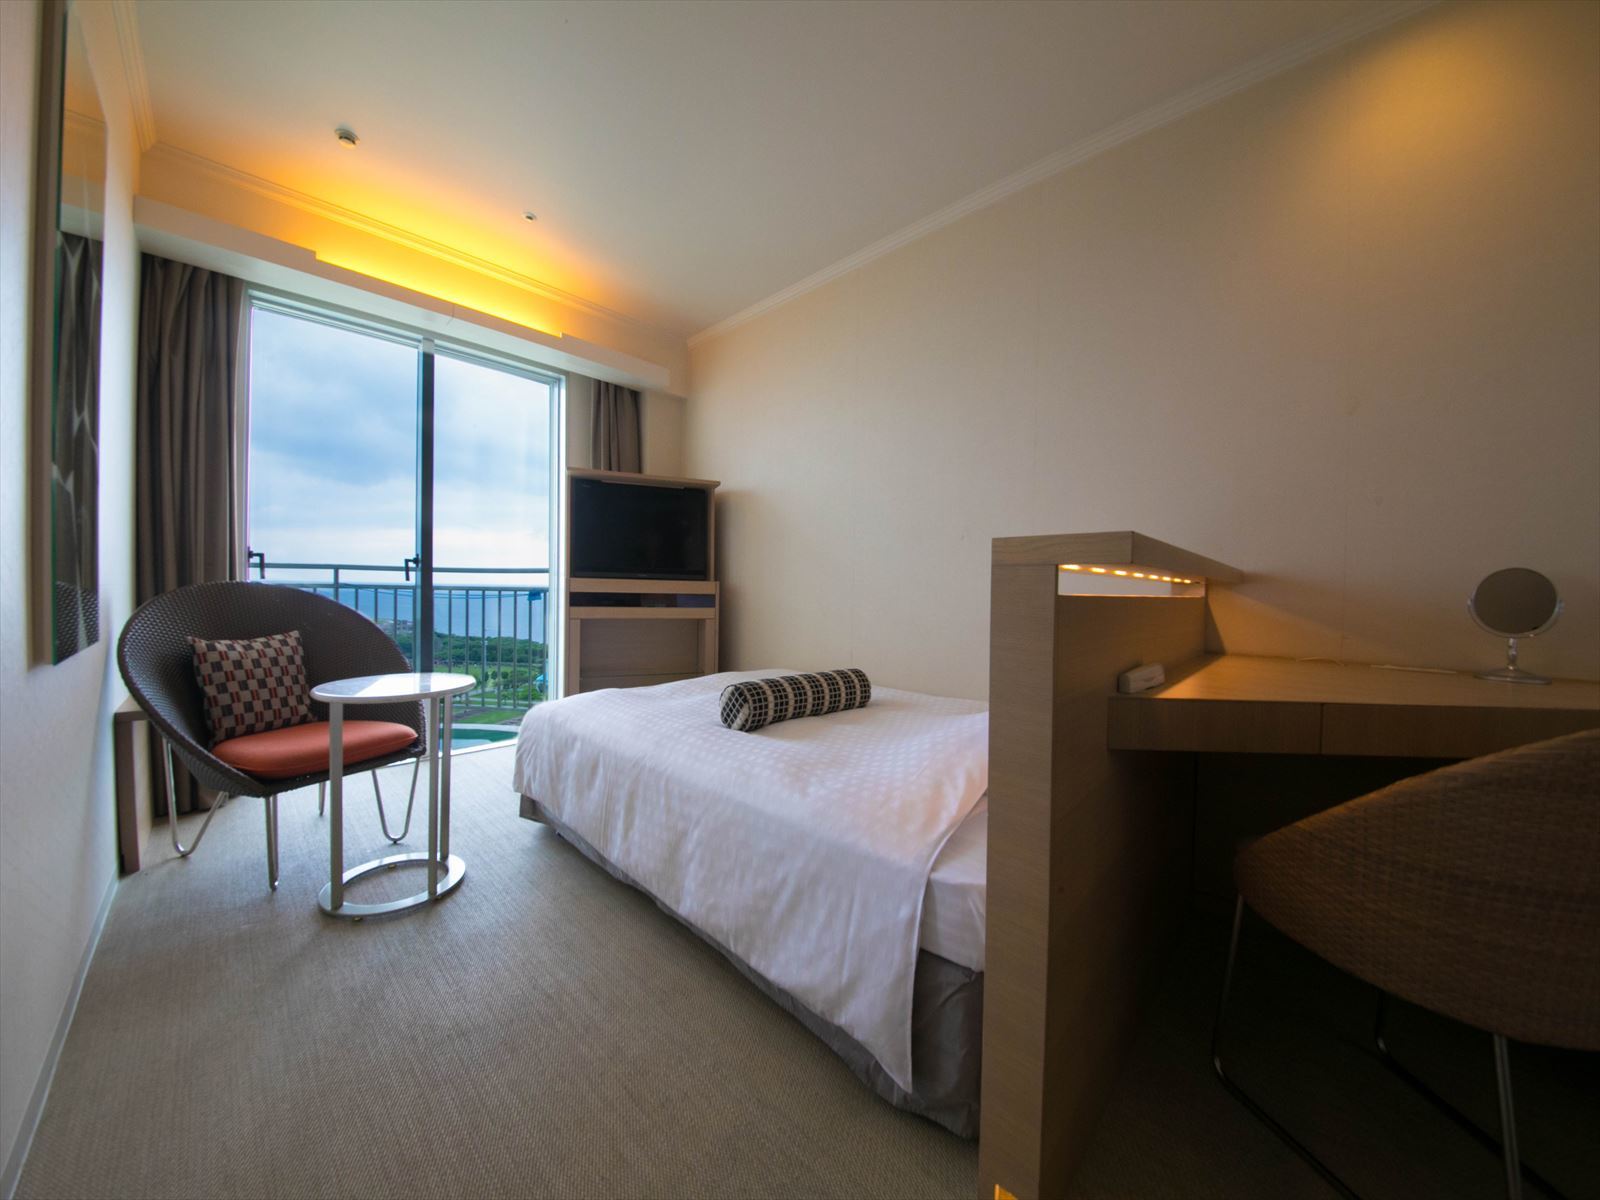 [Main Building] Semi-Double Room (24 ㎡ / Bed width 140 cm) - Enjoy your trip in a compact way